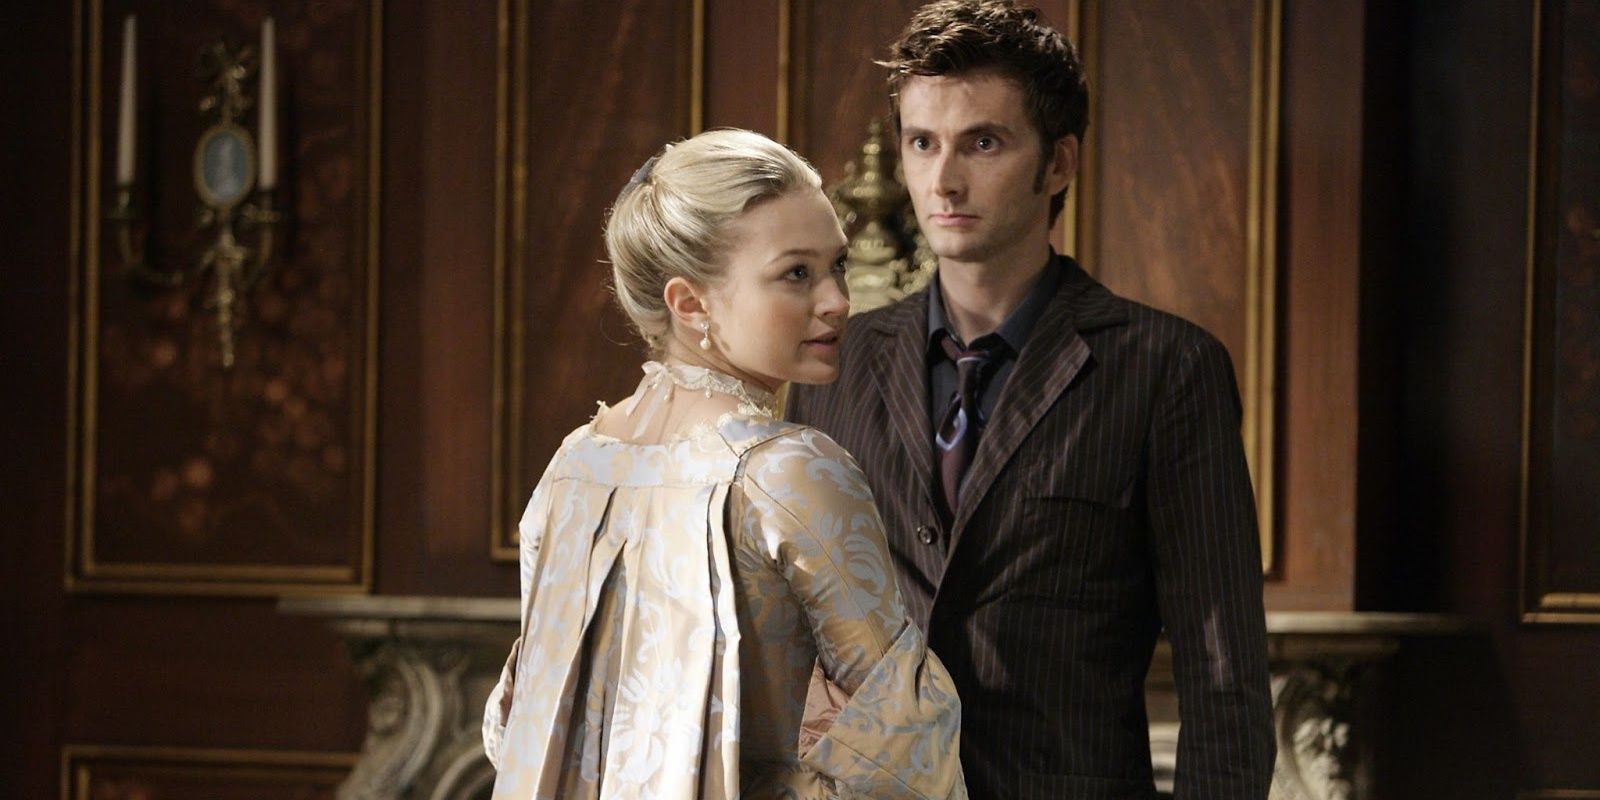 10 and Madame de Pompadour in the episode The Girl in the Fireplace